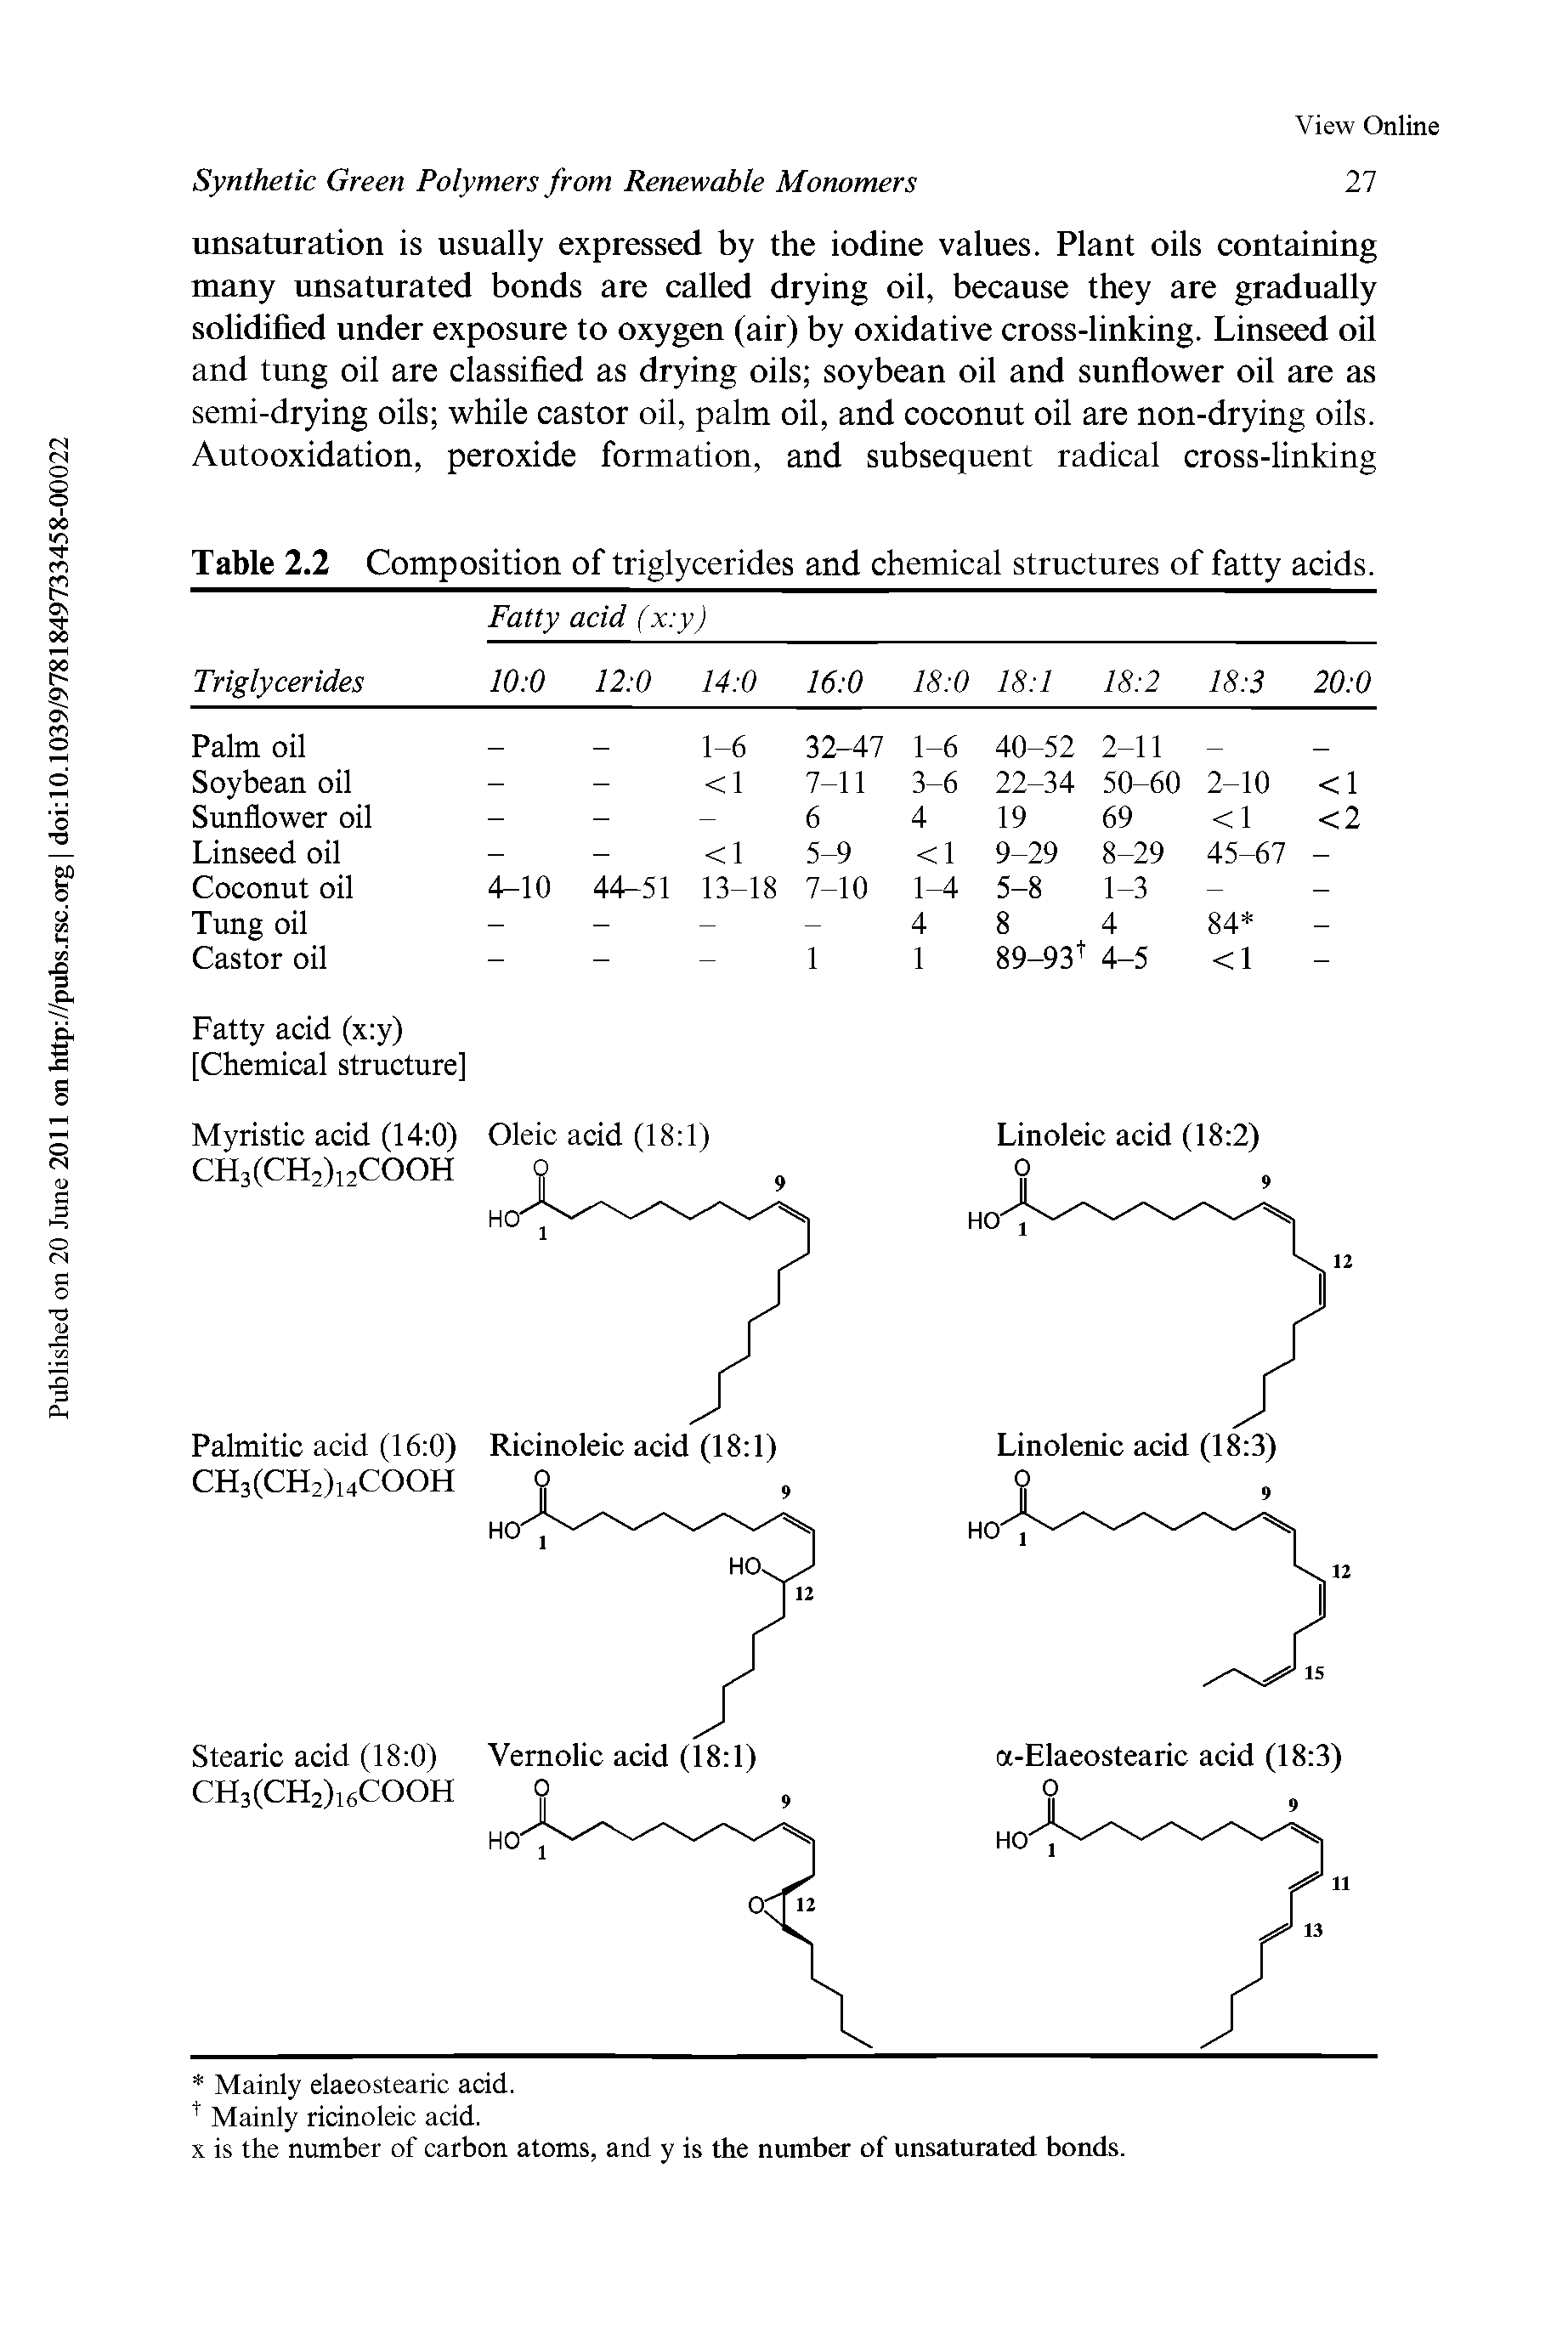 Table 2.2 Composition of triglycerides and chemical structures of fatty acids.